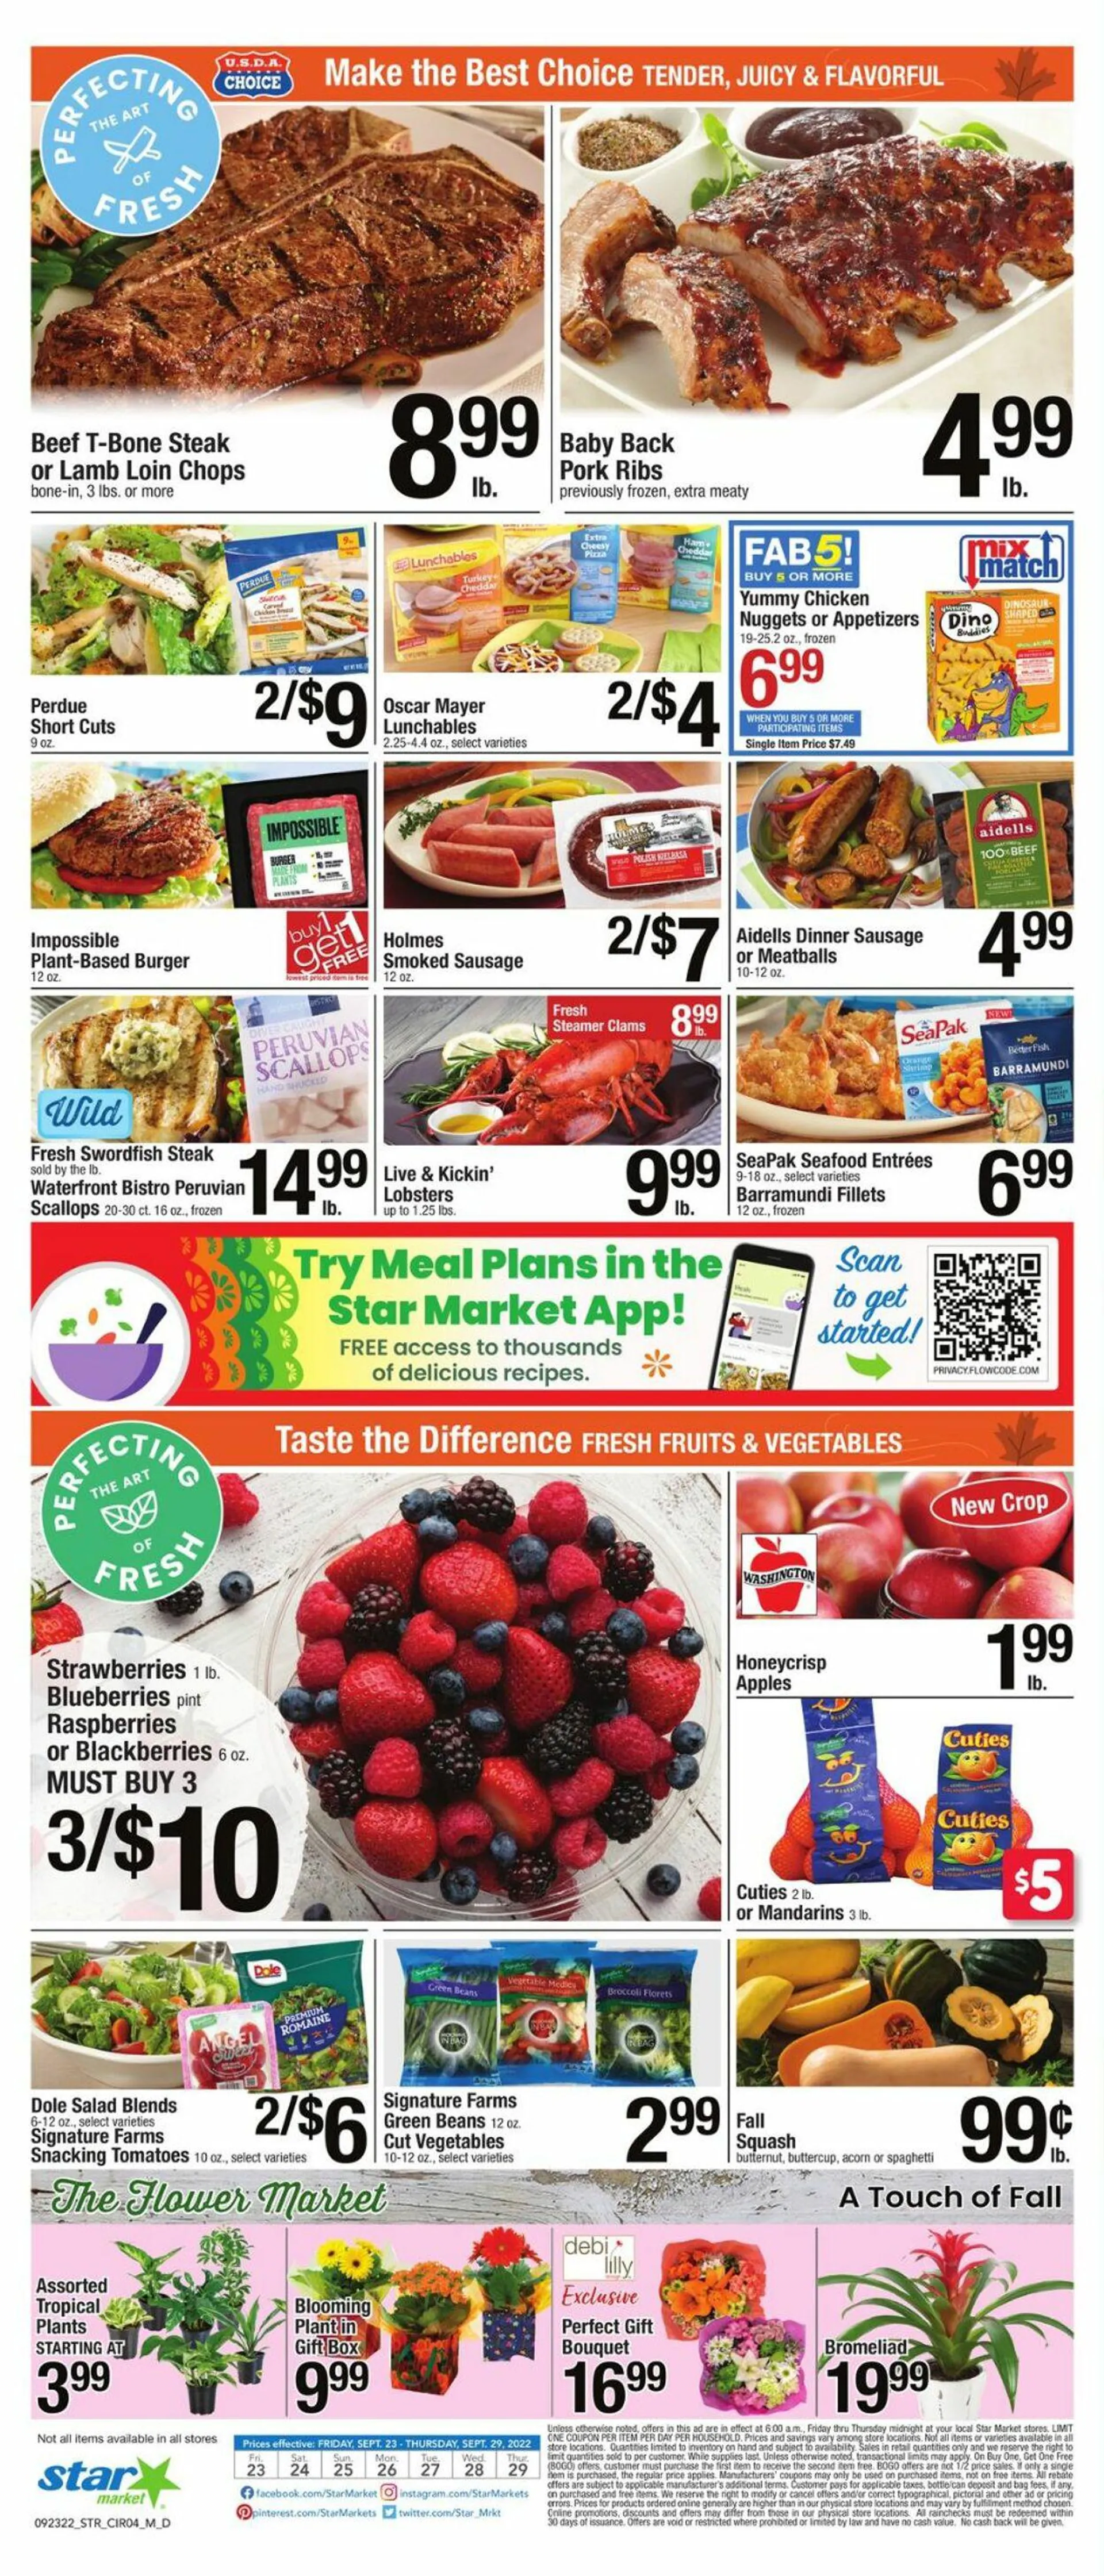 Star Market Current weekly ad - 3